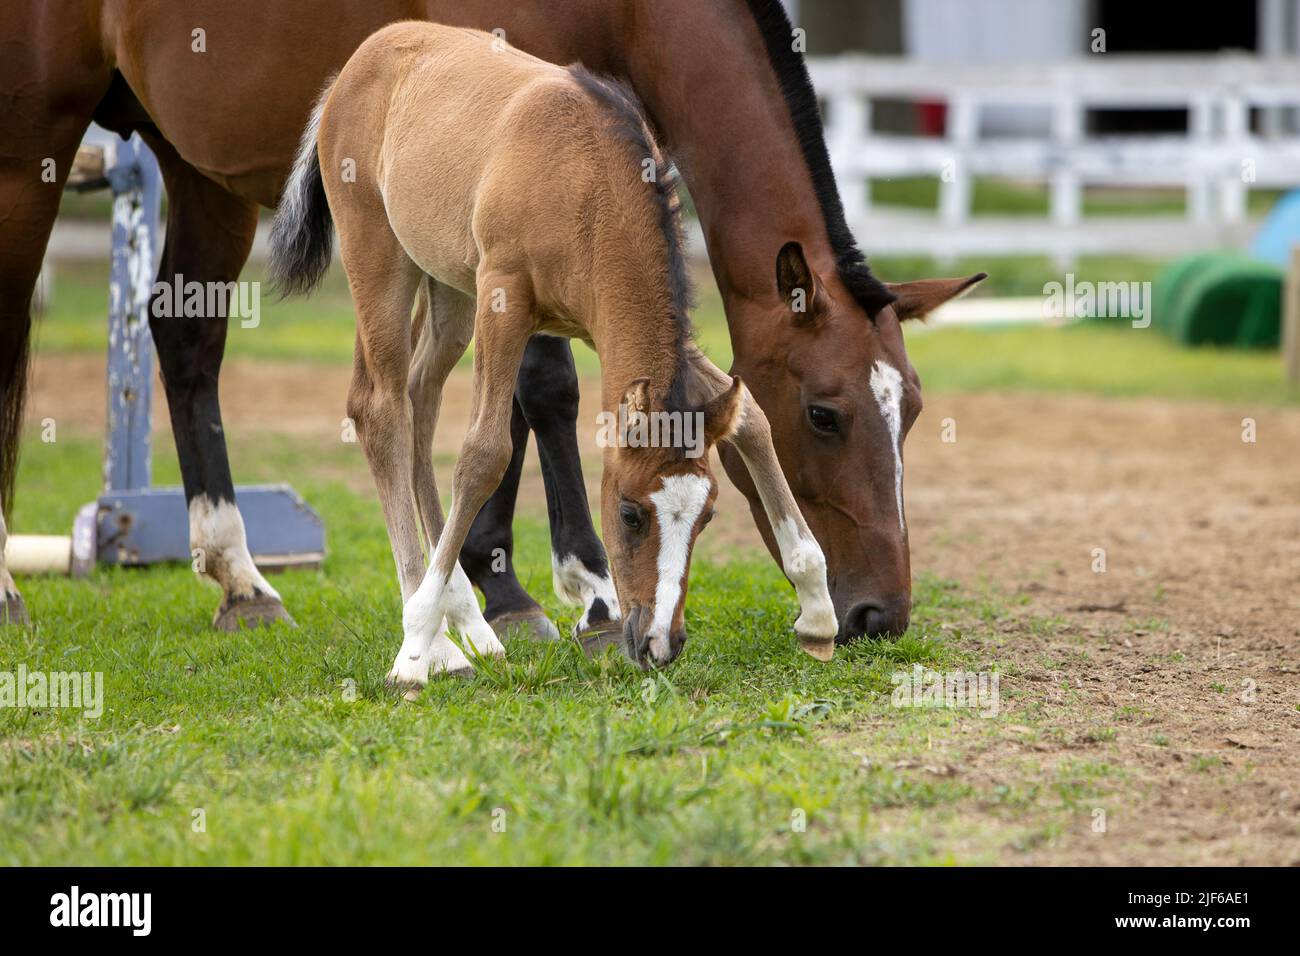 A foal horse grazing next to her mother. Stock Photo